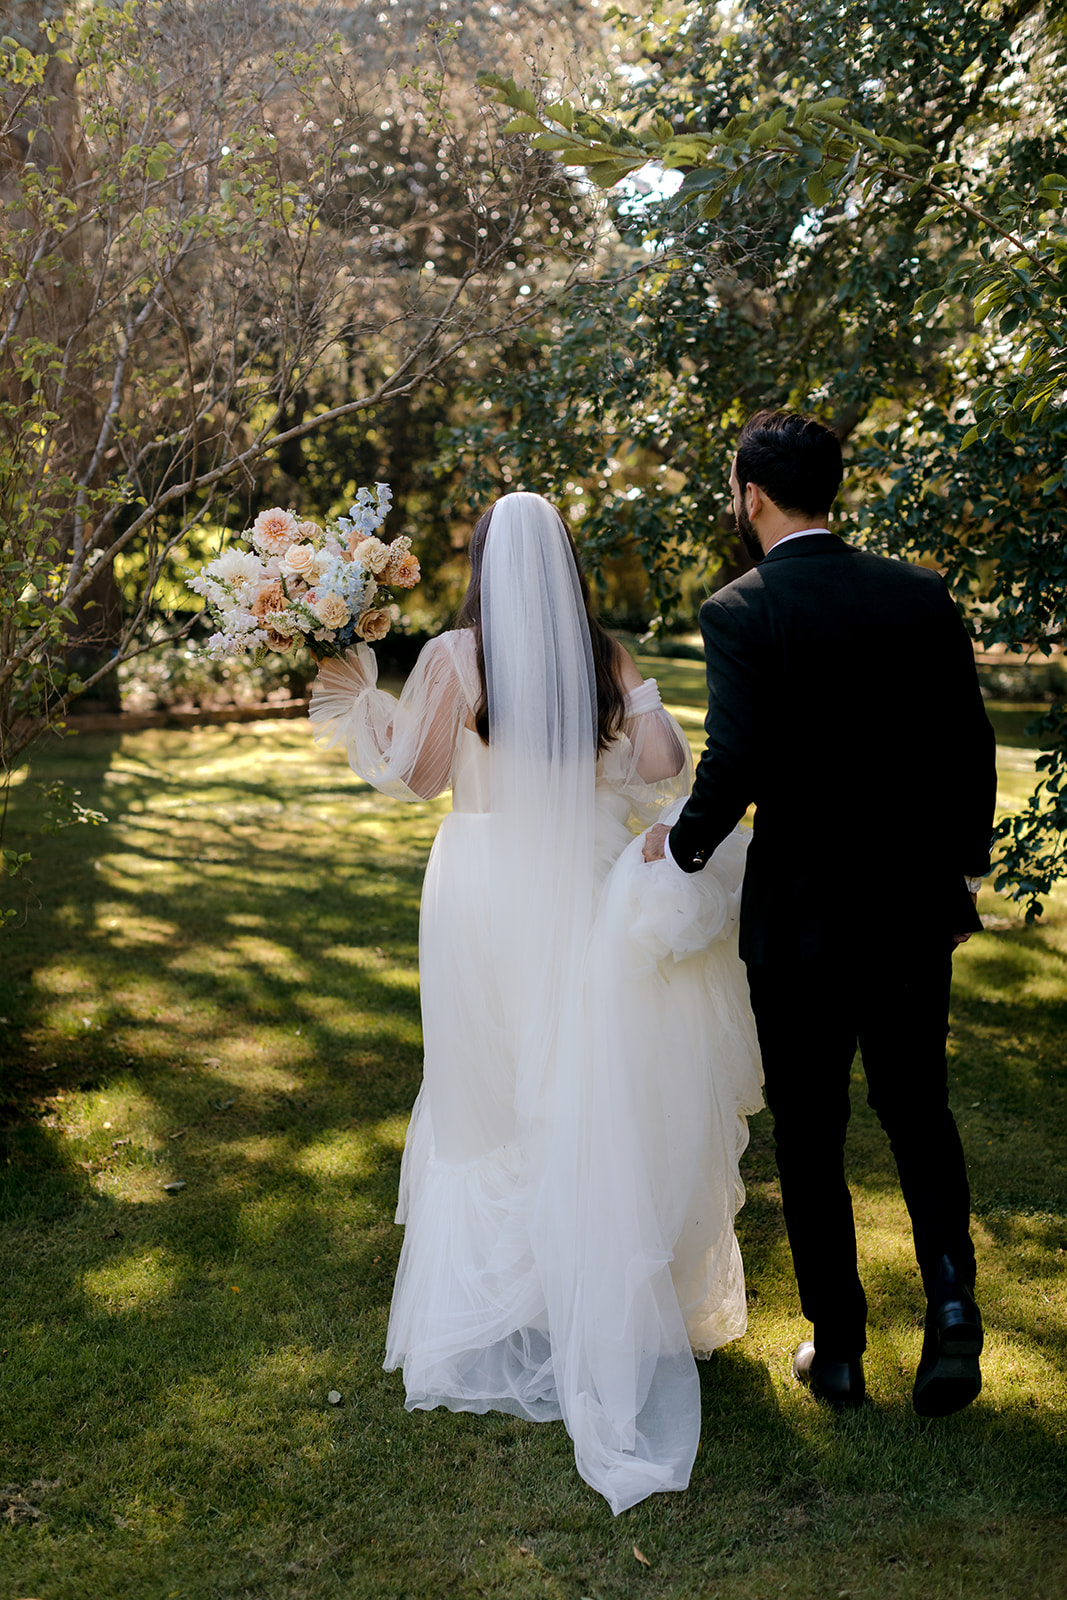 Bride & groom walking in an orchard during their elegant country intimate wedding.